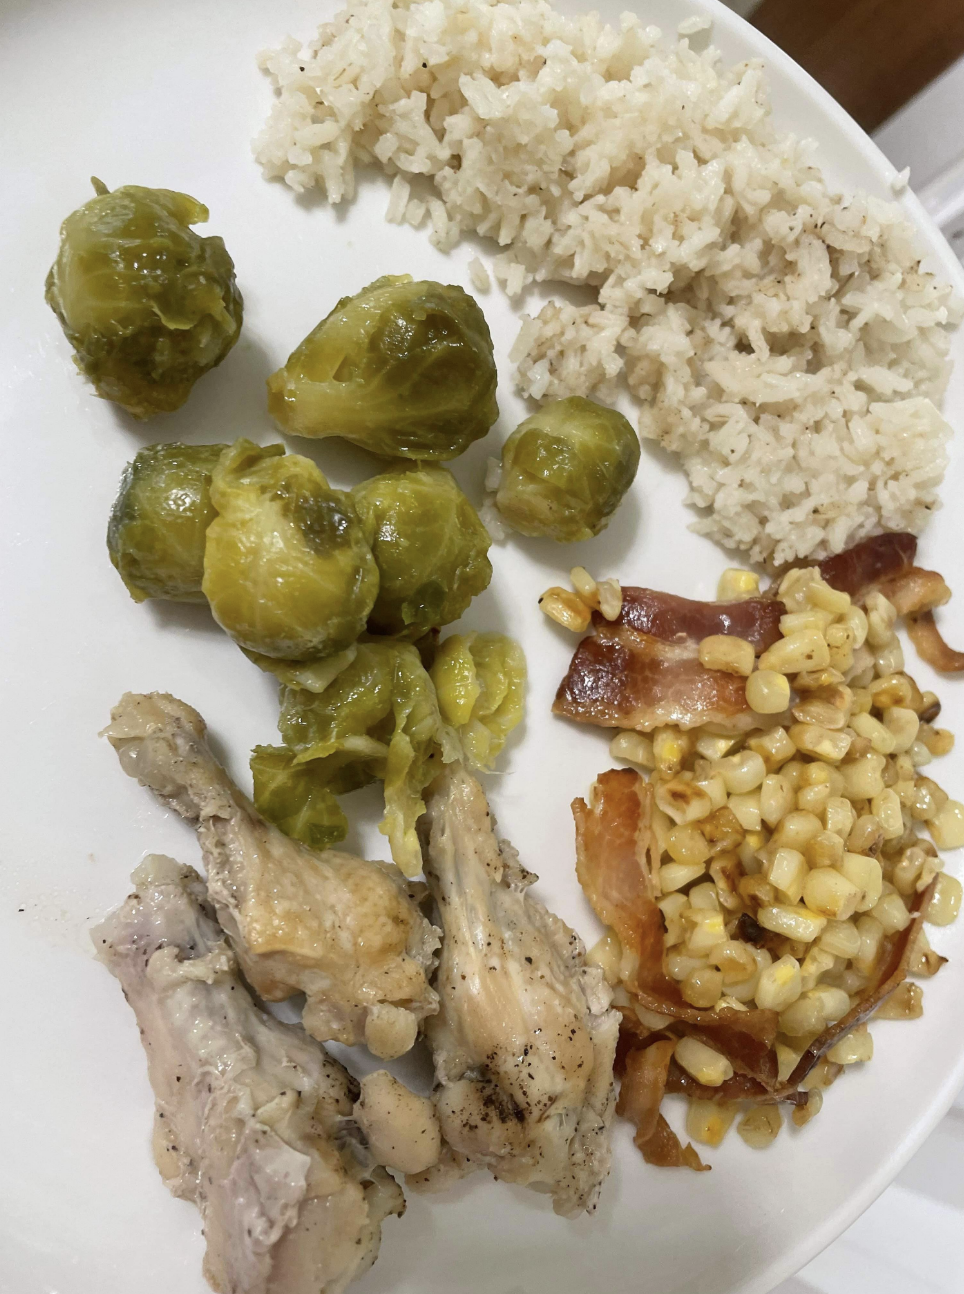 This plate has corn, Brussels sprouts, rice and chicken drumsticks, and they all look undercooked